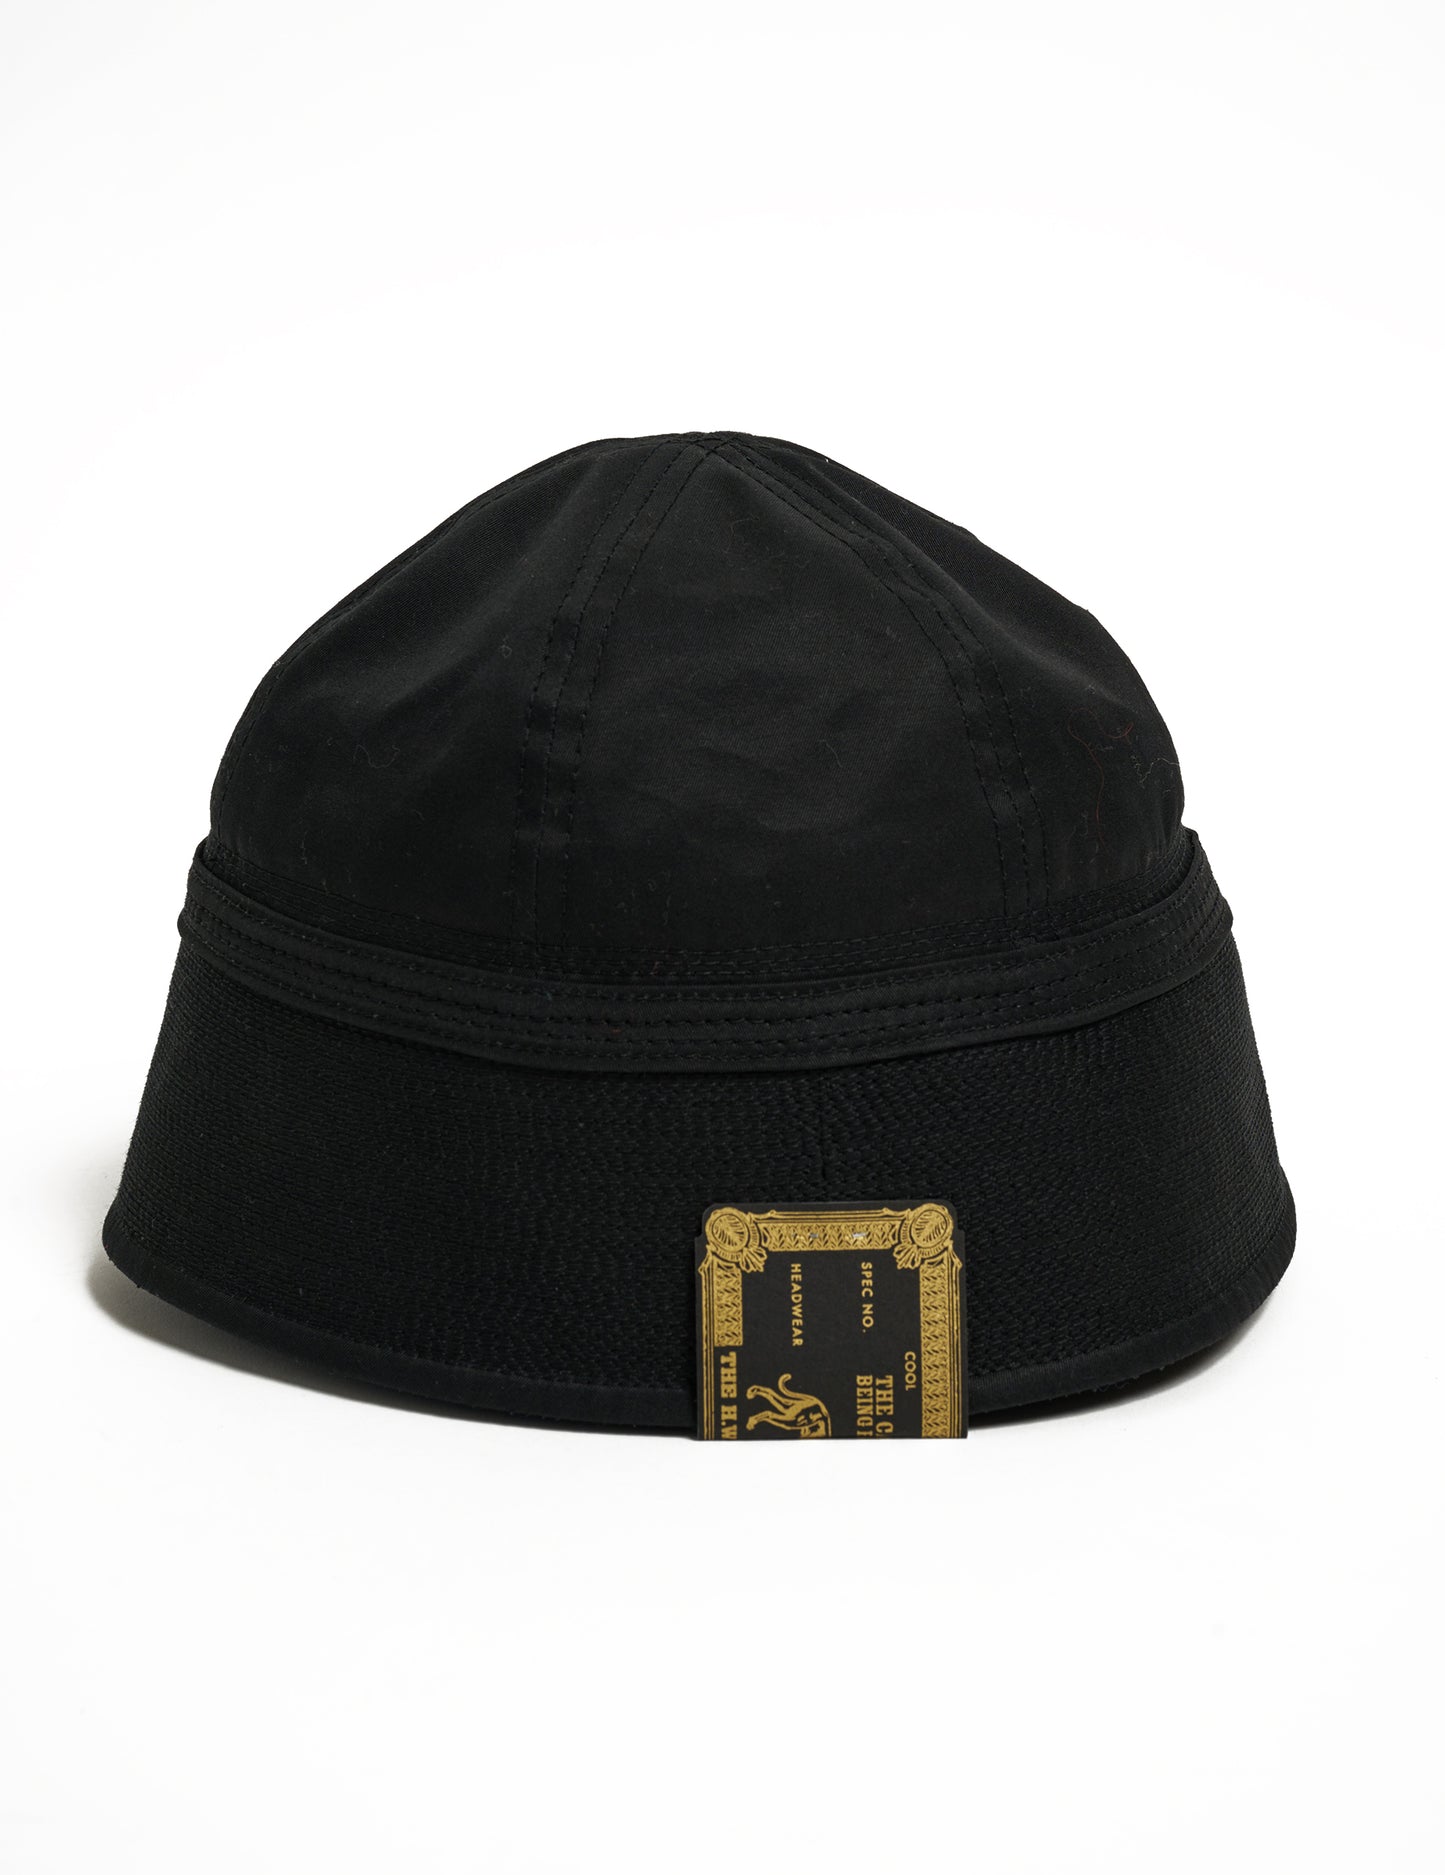 THE H.W.DOG x DELUXE HAT